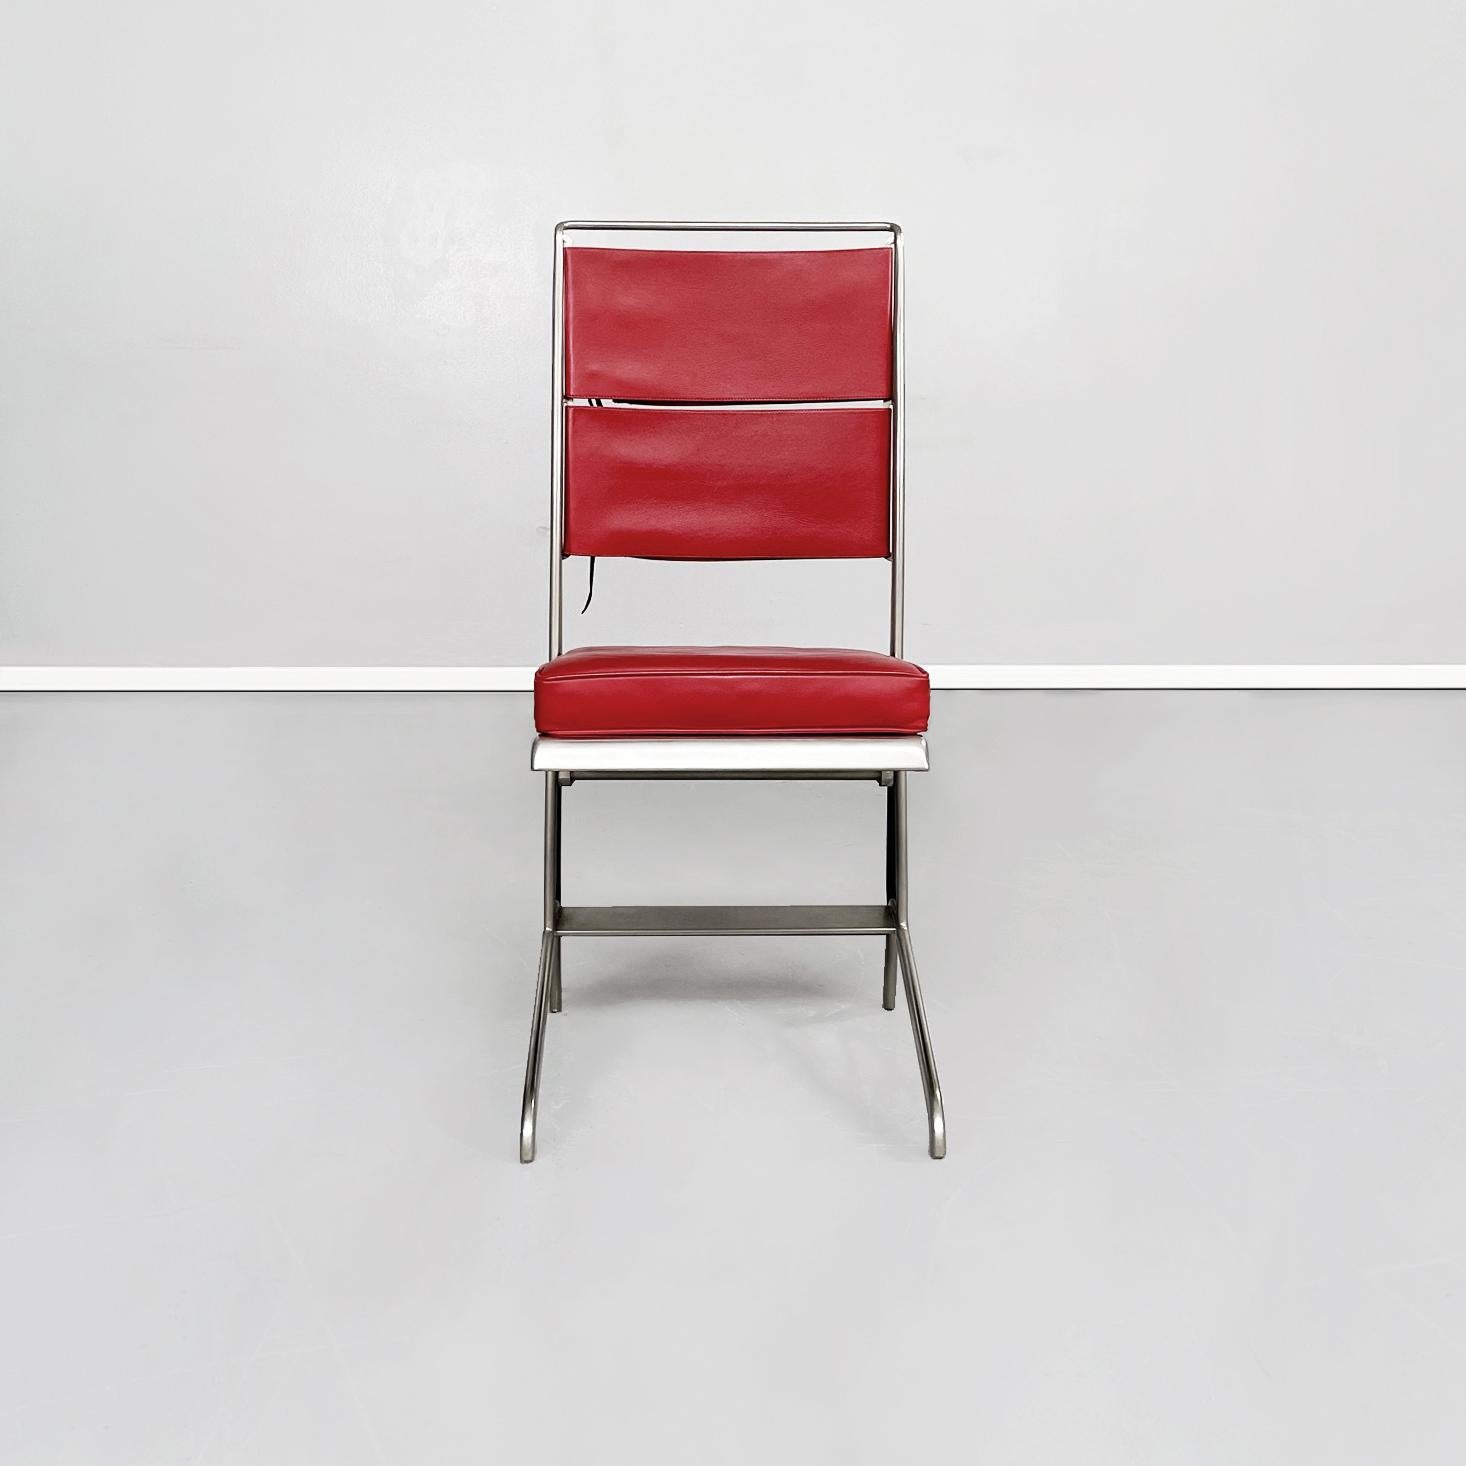 French mid-century red leather and steel chair by Jean Prouvé for Tecta, 1980s
Chair with steel structure and resealable seat. The seat is made up of a padded cushion covered in red leather, while the back is made up of two strips of red leather